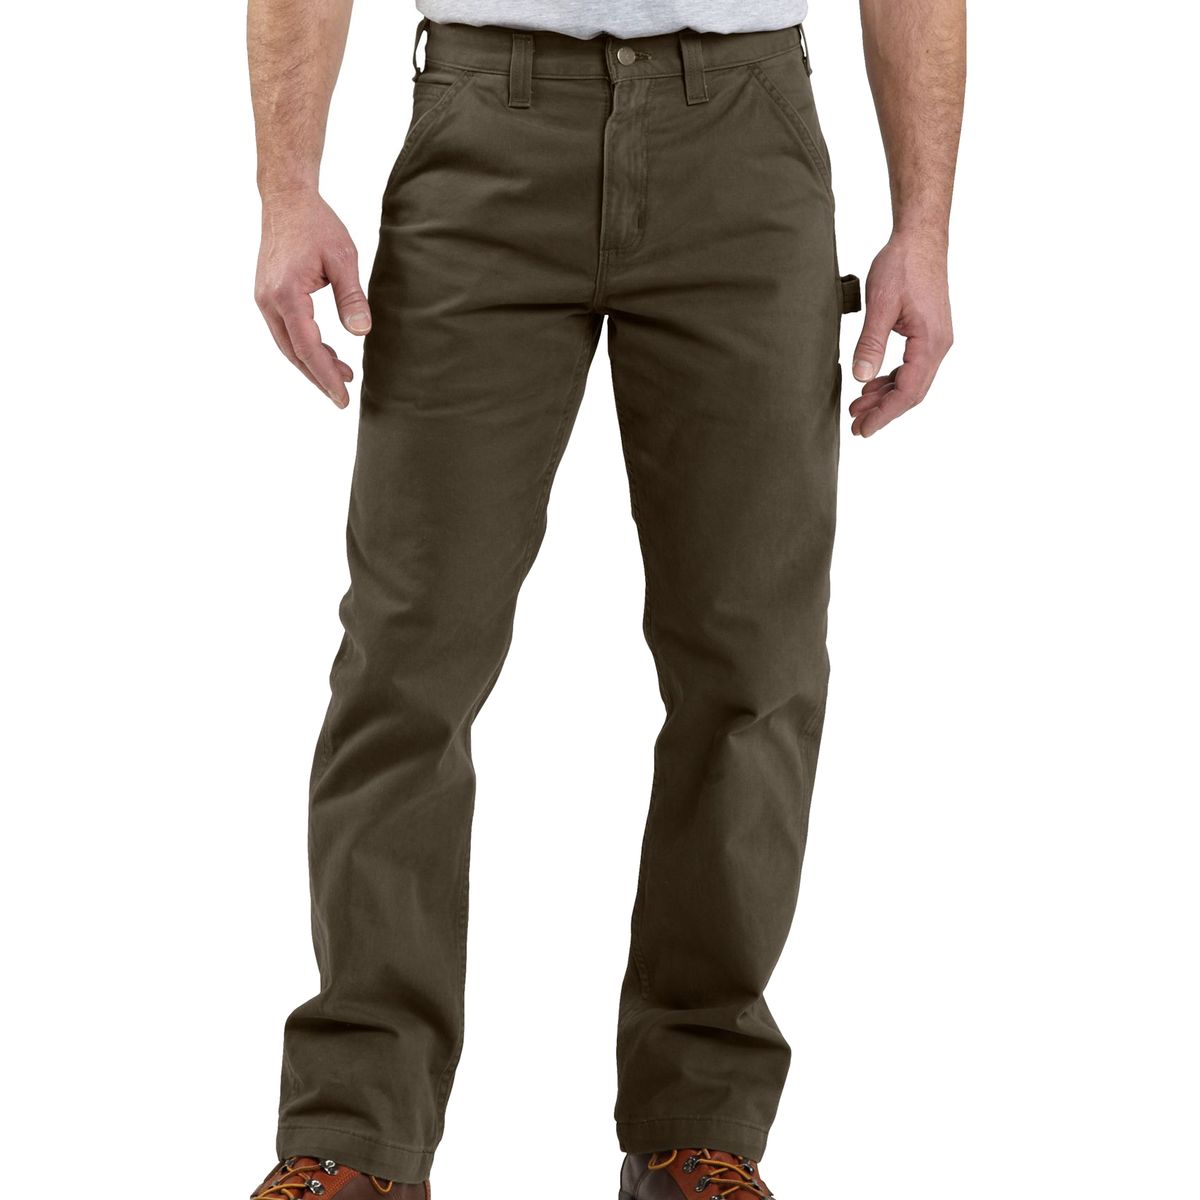 Carhartt Washed Twill Dungaree Pant - Men's | Backcountry.com